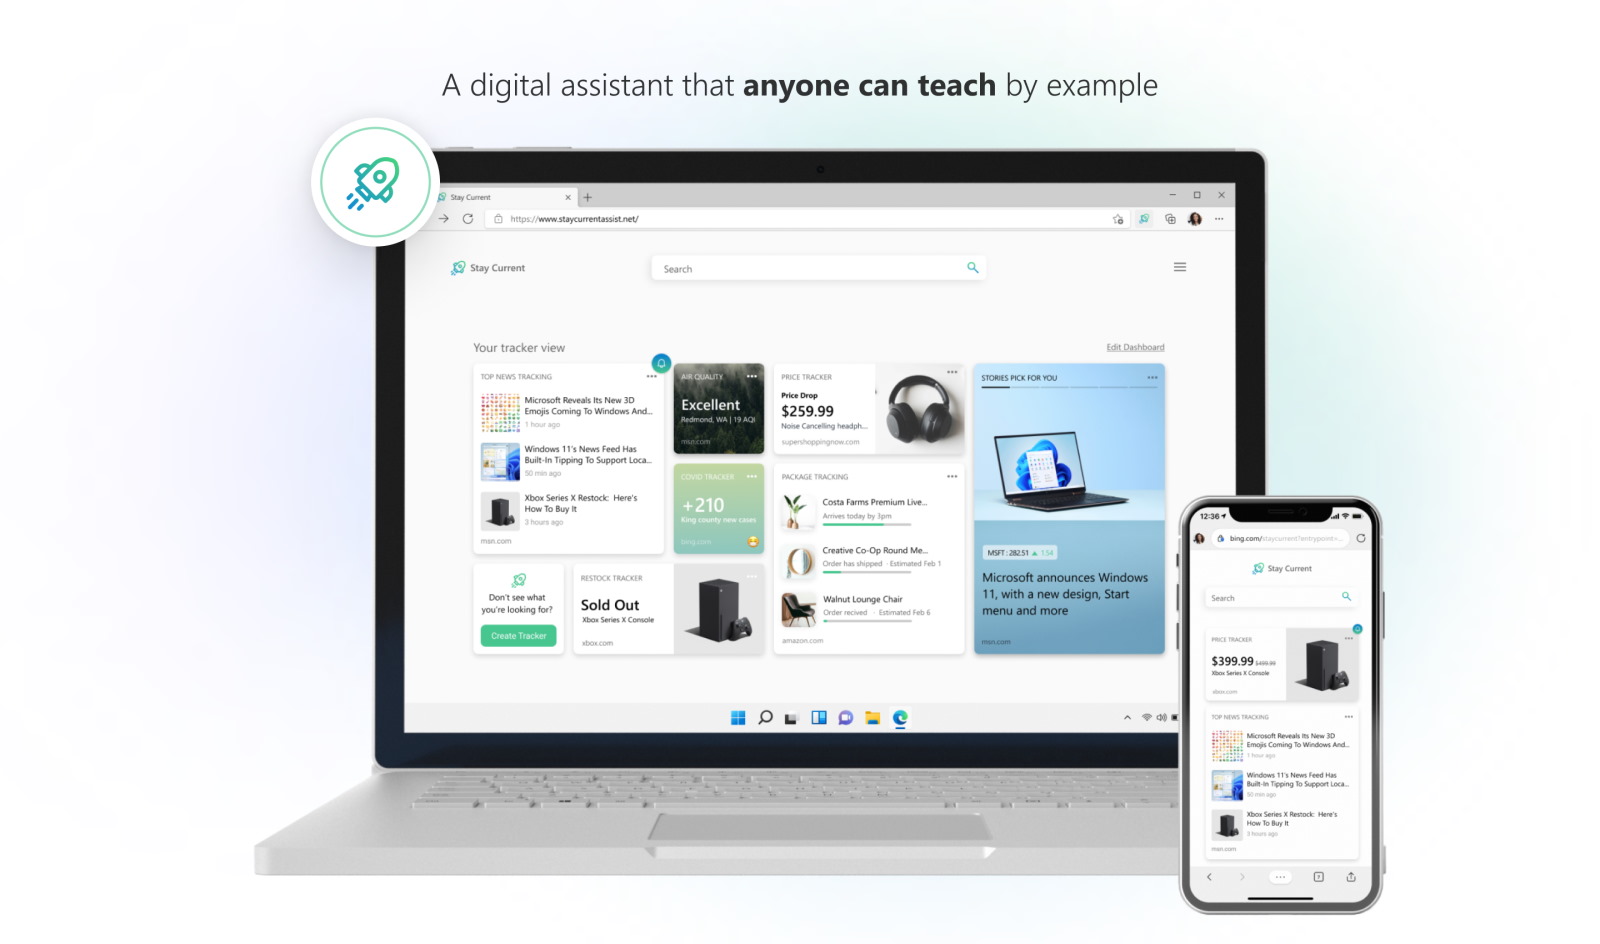 Stay Current, a digital assistant anyone can teach by example